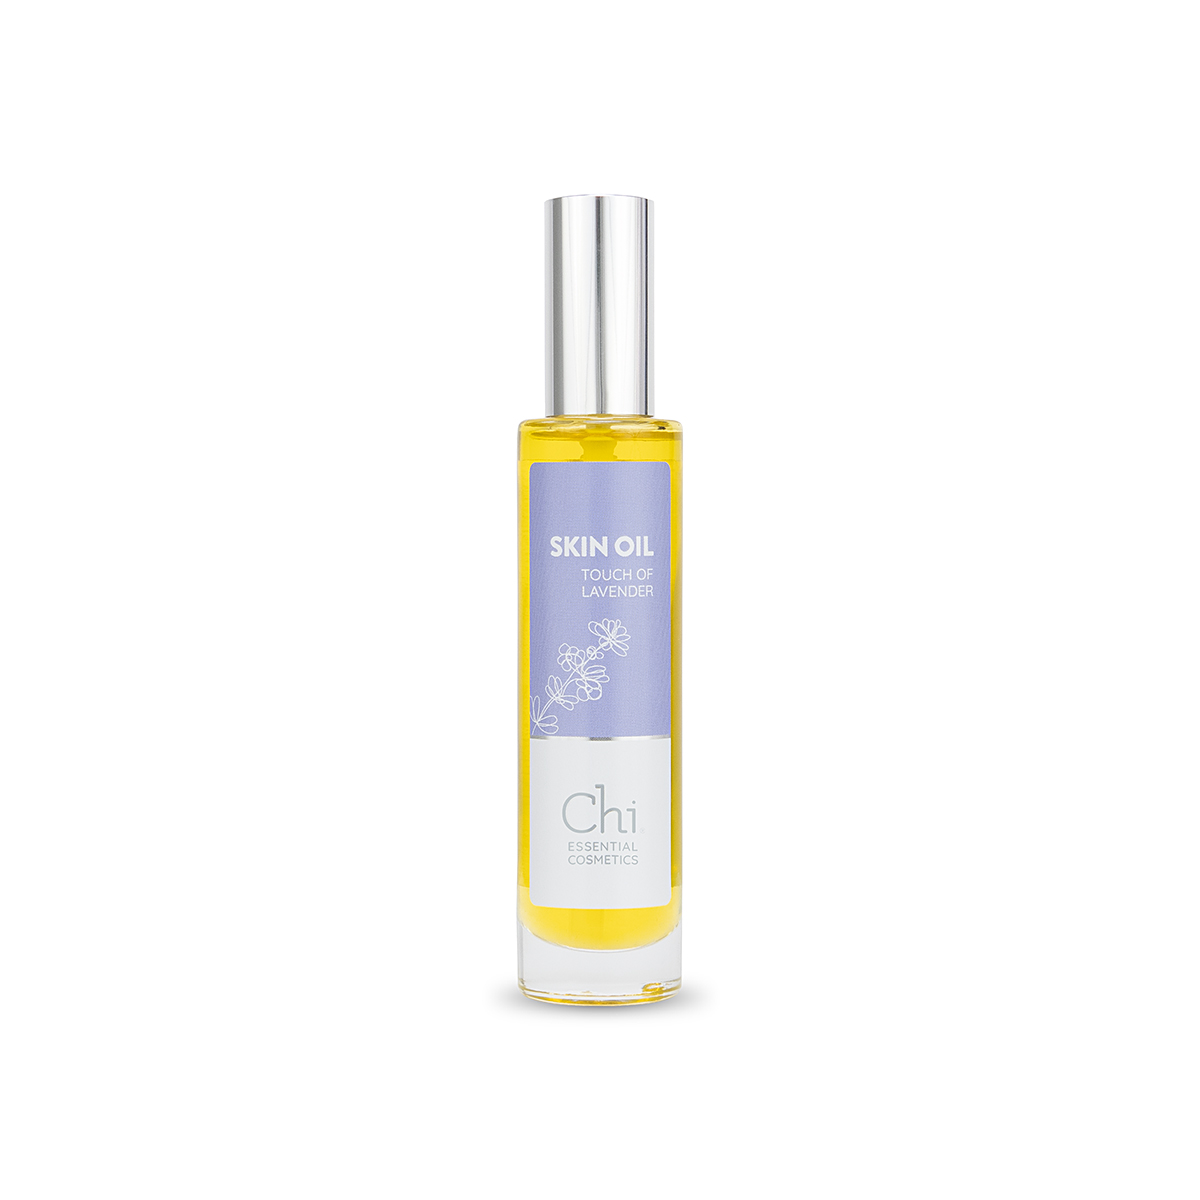 a touch of lavender - skin oil